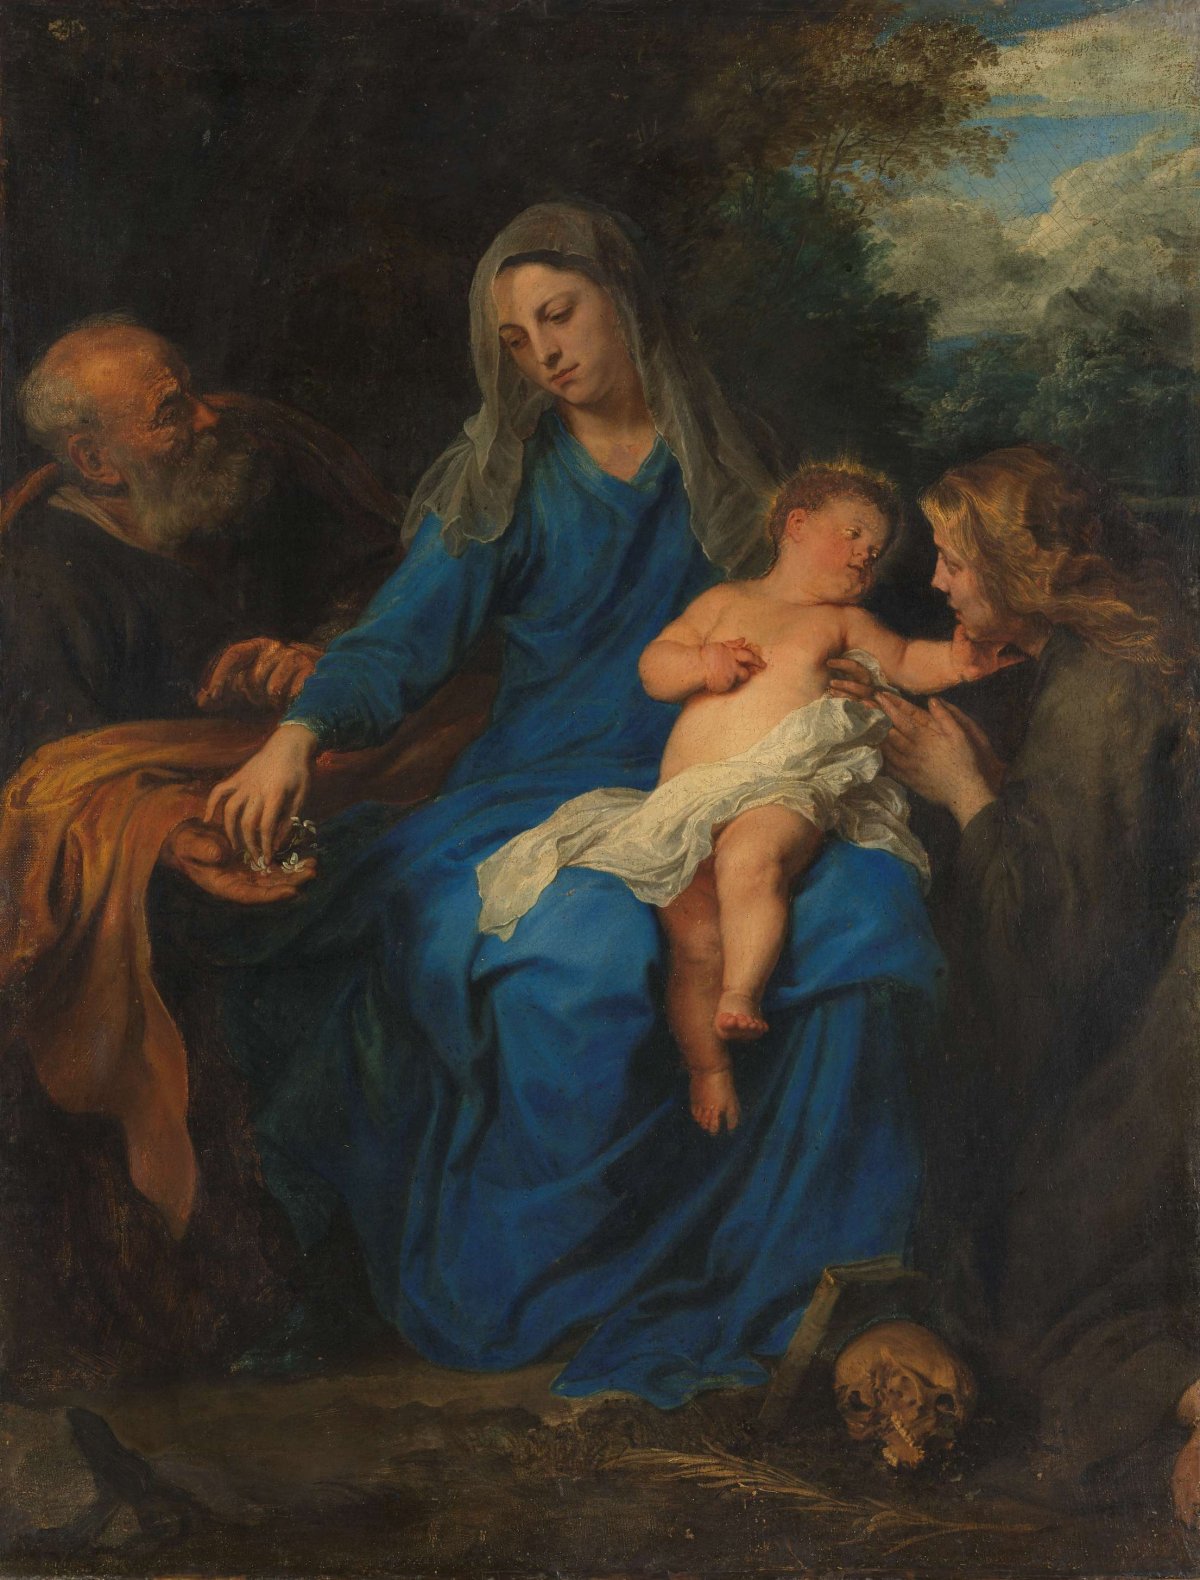 The Holy Family with a Female Saint in Adoration, Anthony van Dyck, c. 1630 - c. 1650